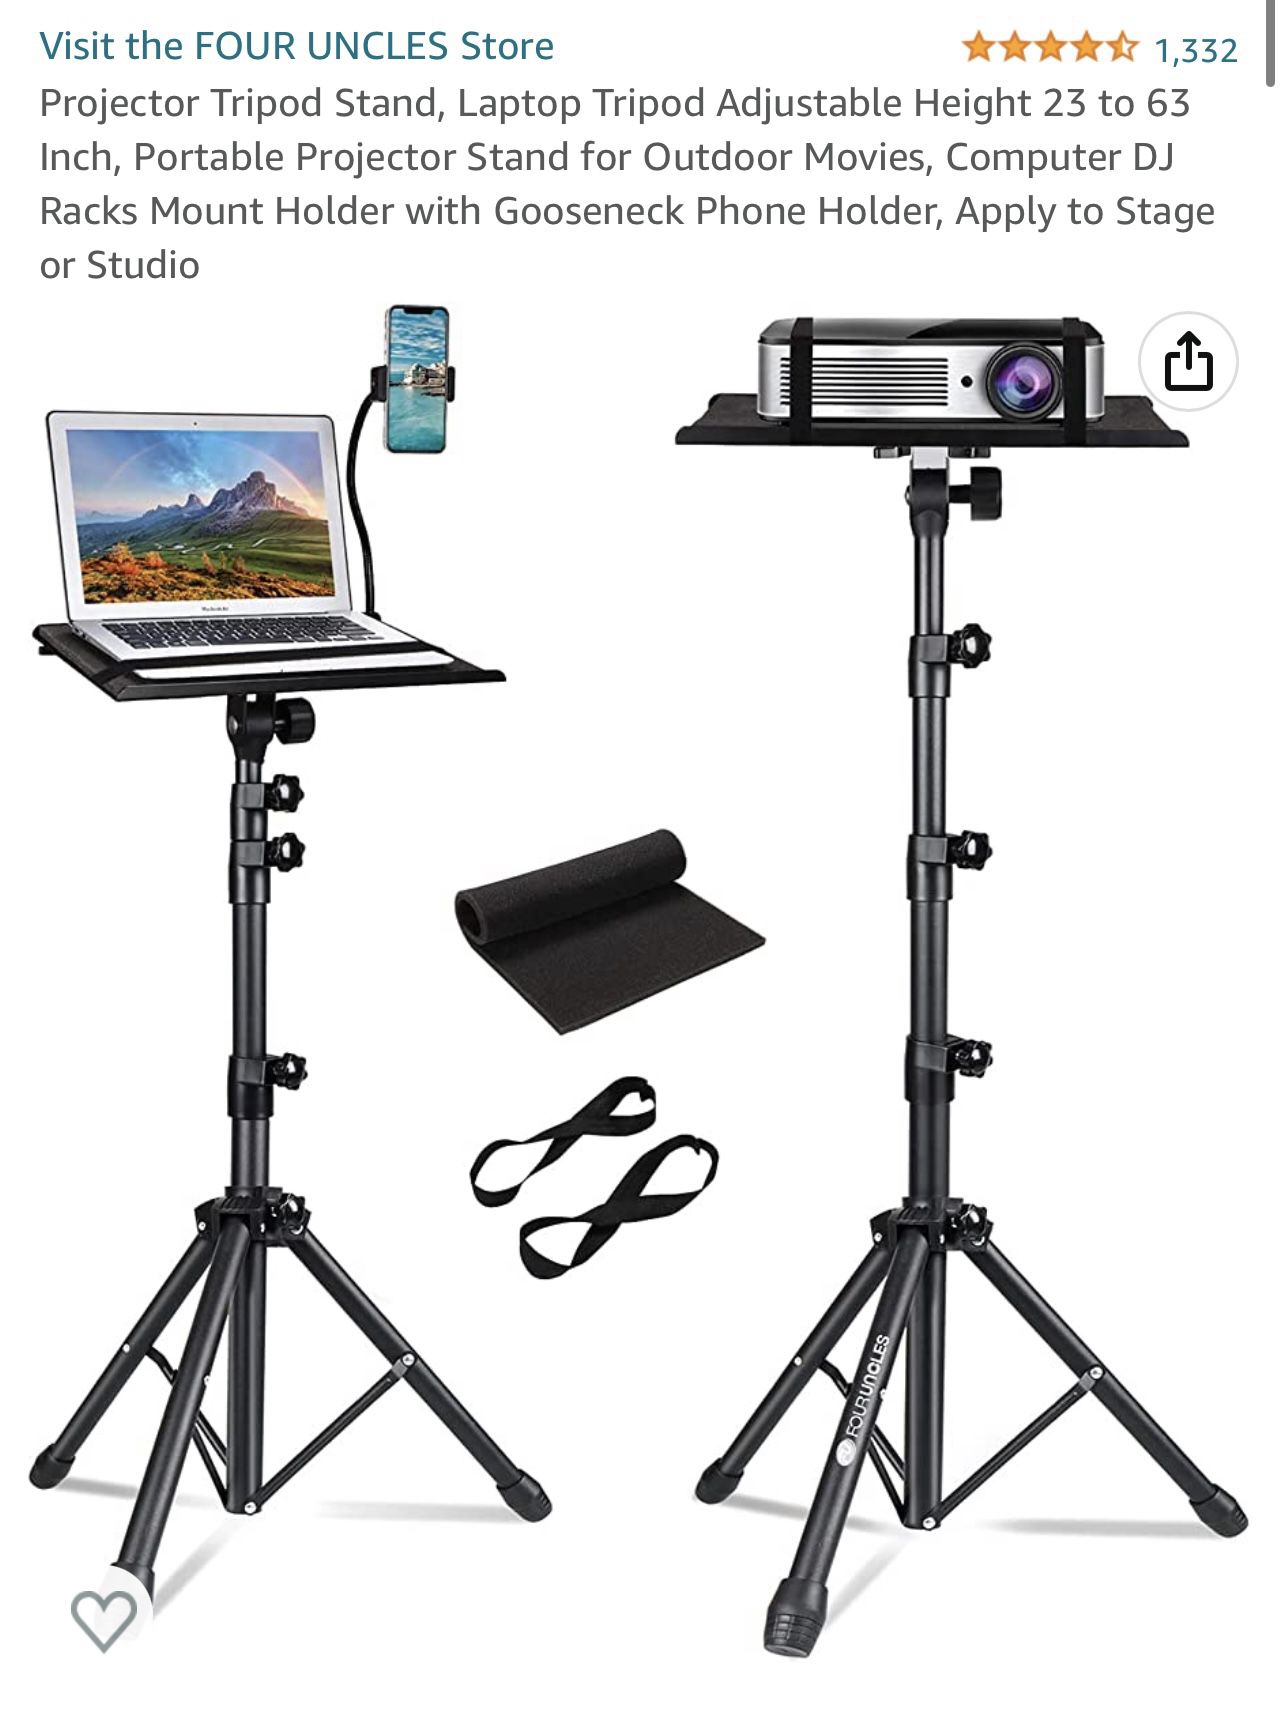 Projector/laptop Stand